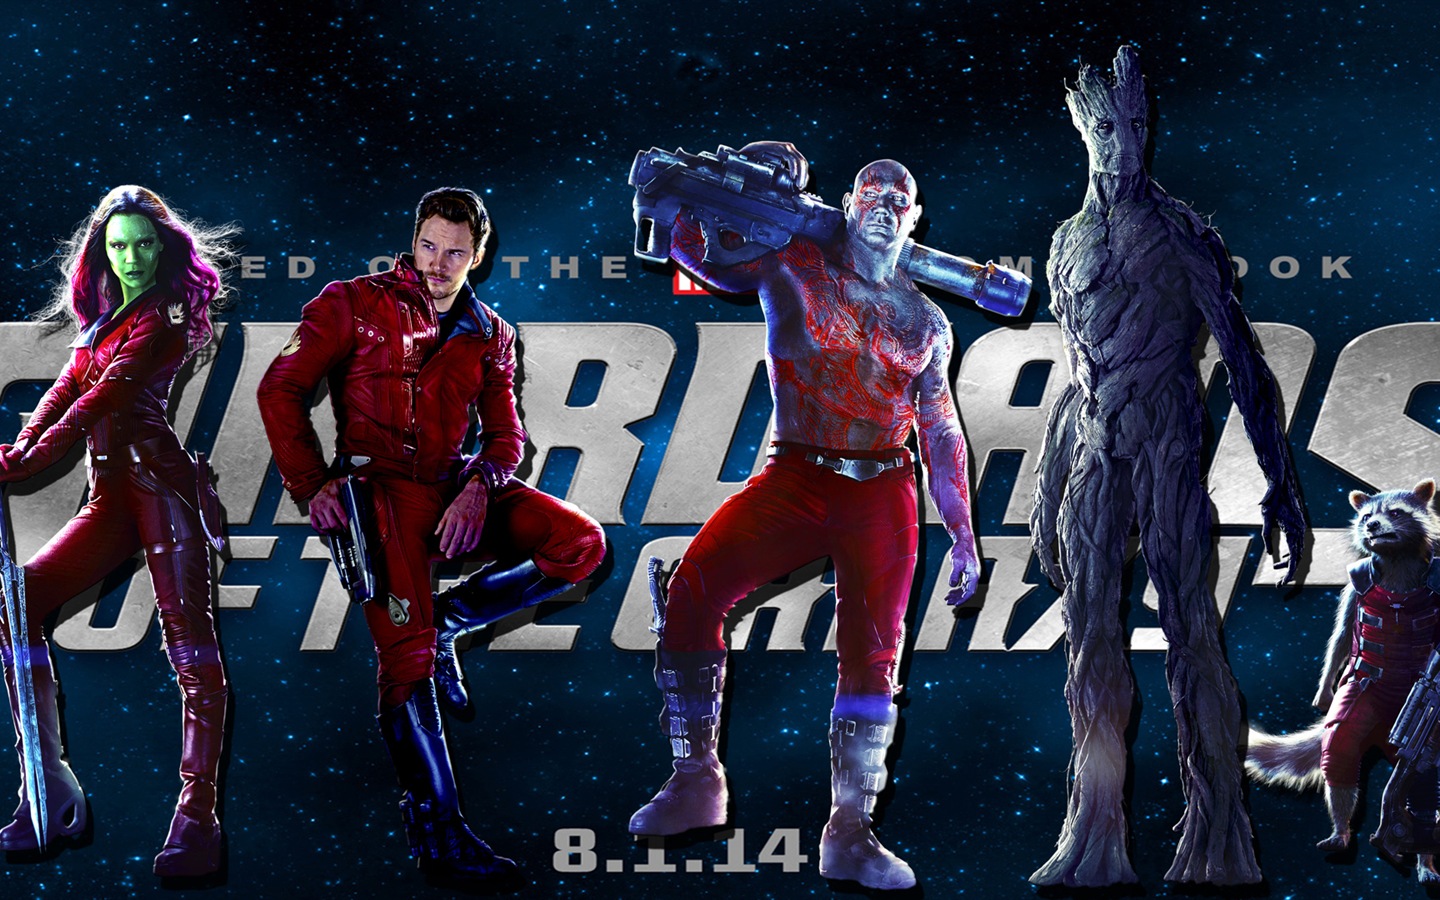 Guardians of the Galaxy 2014 HD movie wallpapers #3 - 1440x900